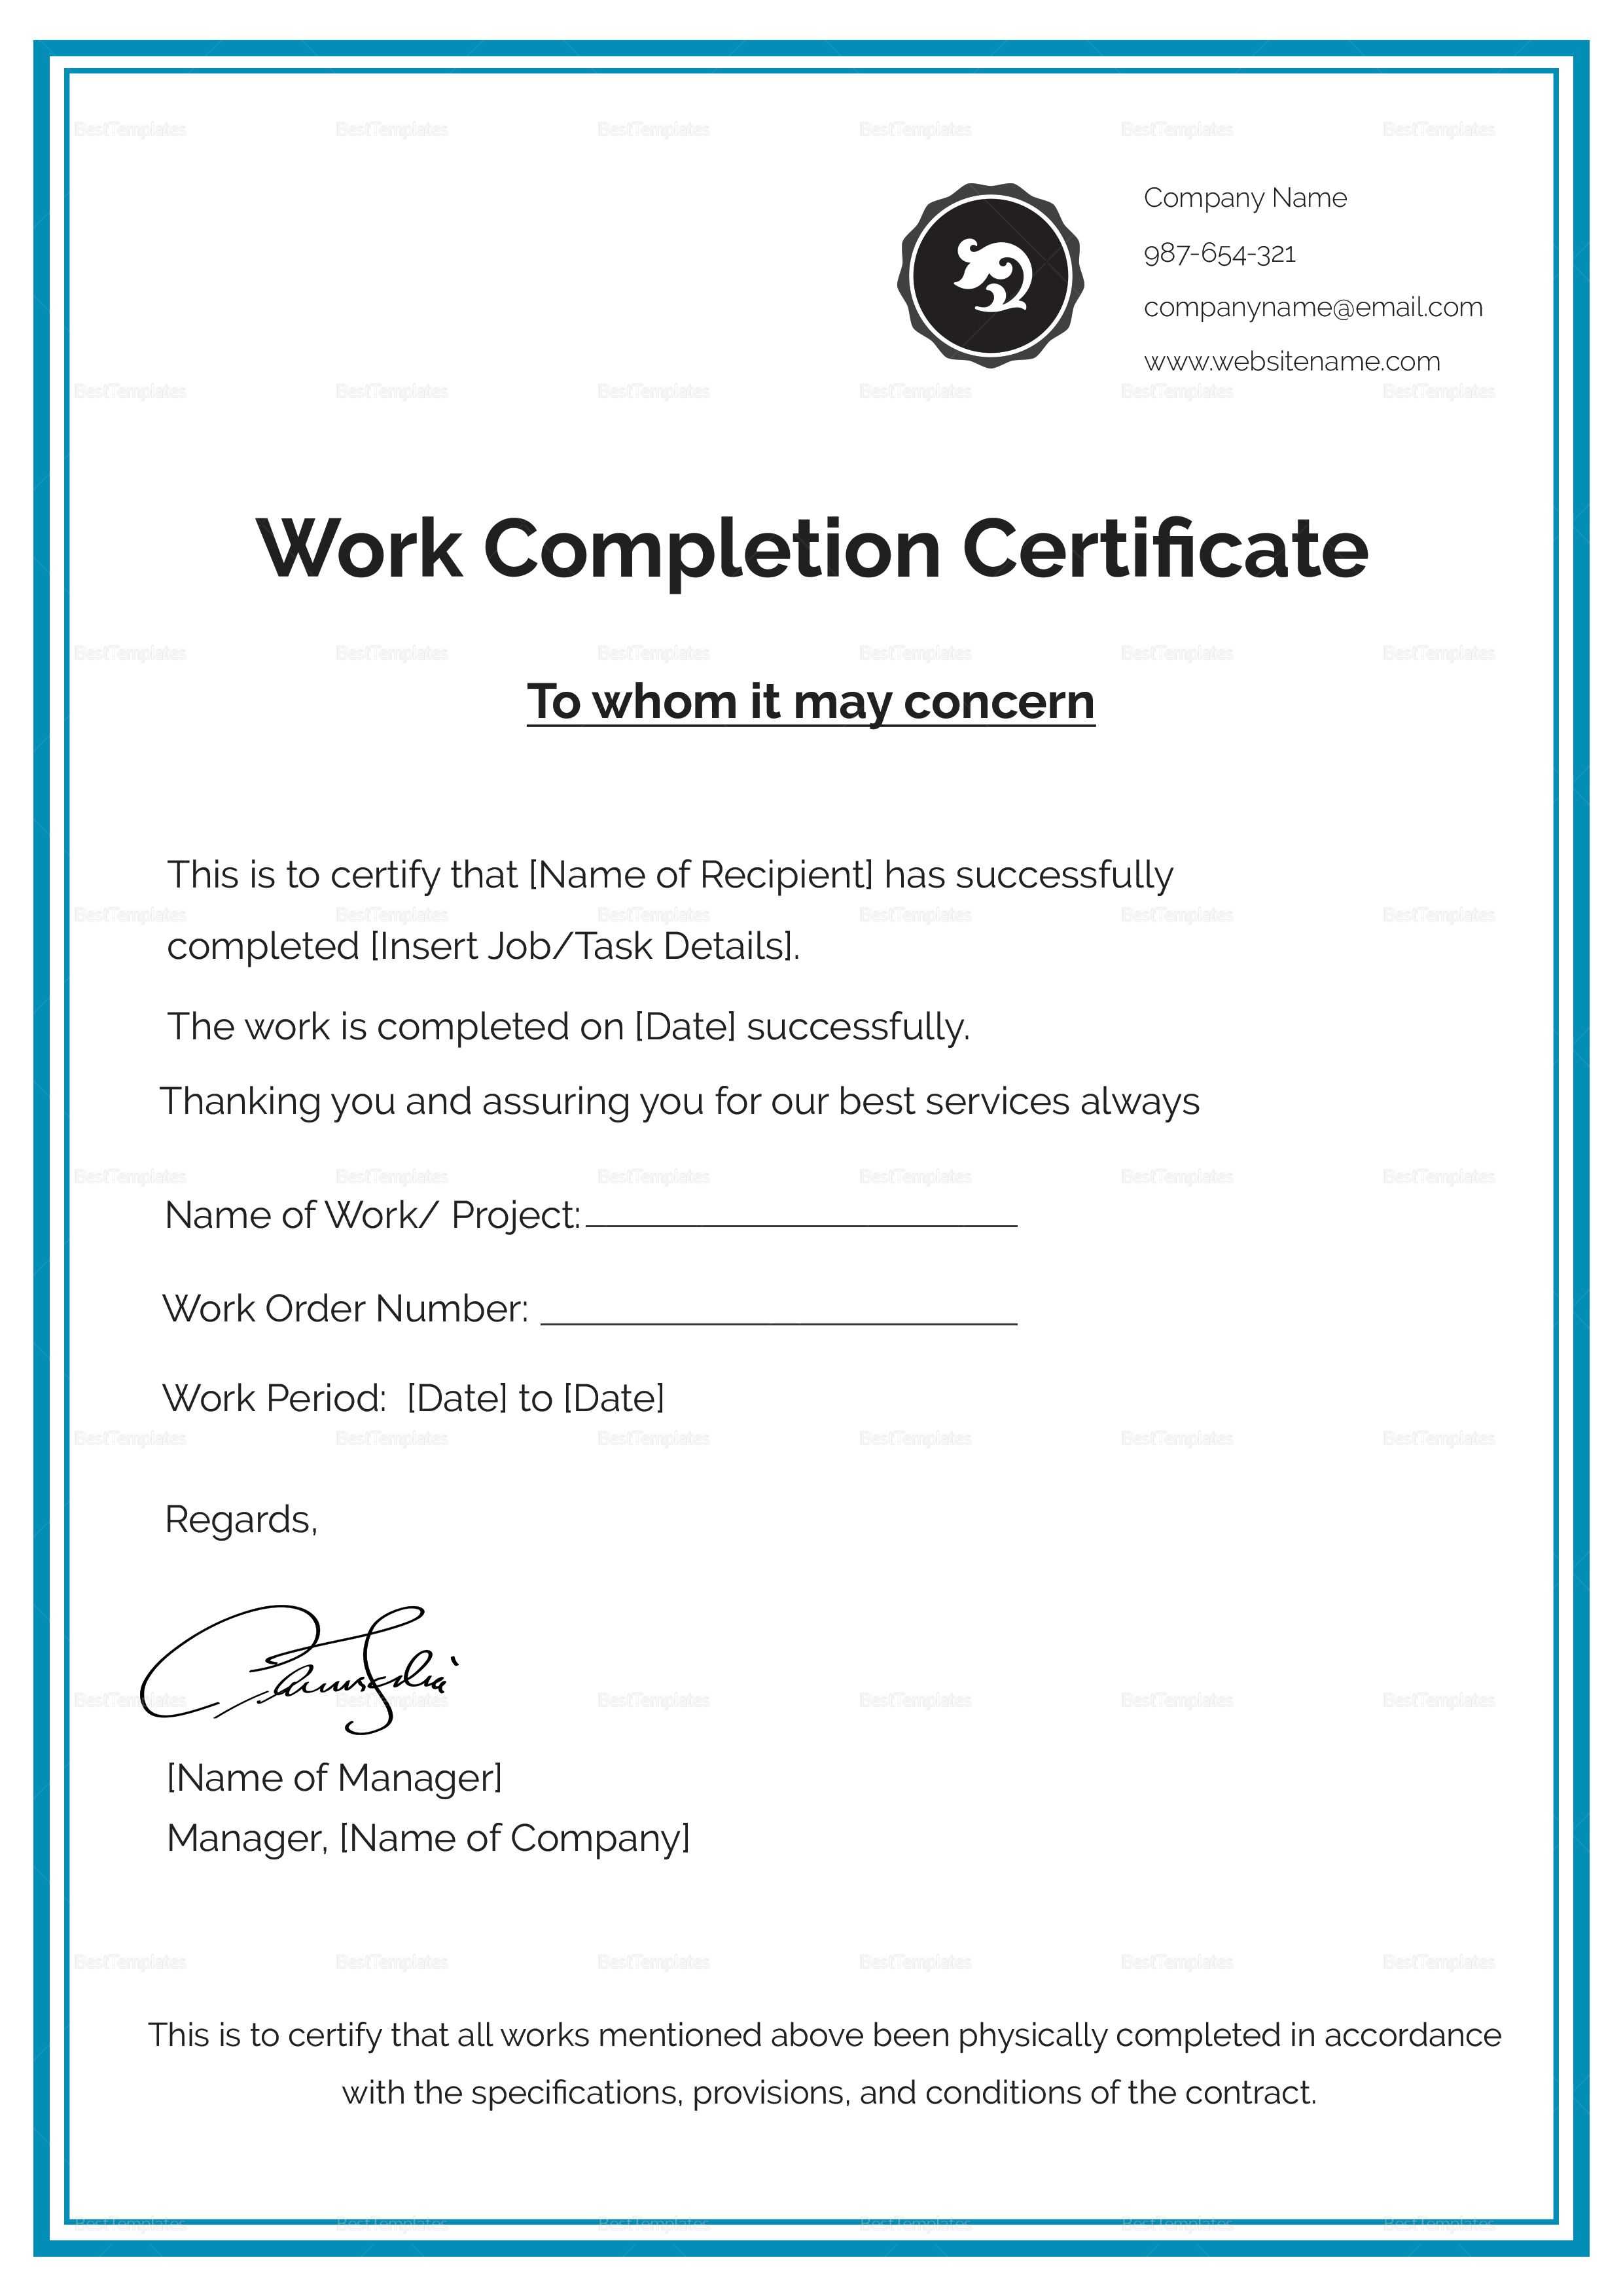 Work Completion Certificate Template In 2019 | Certificate With Regard To Certificate Template For Project Completion